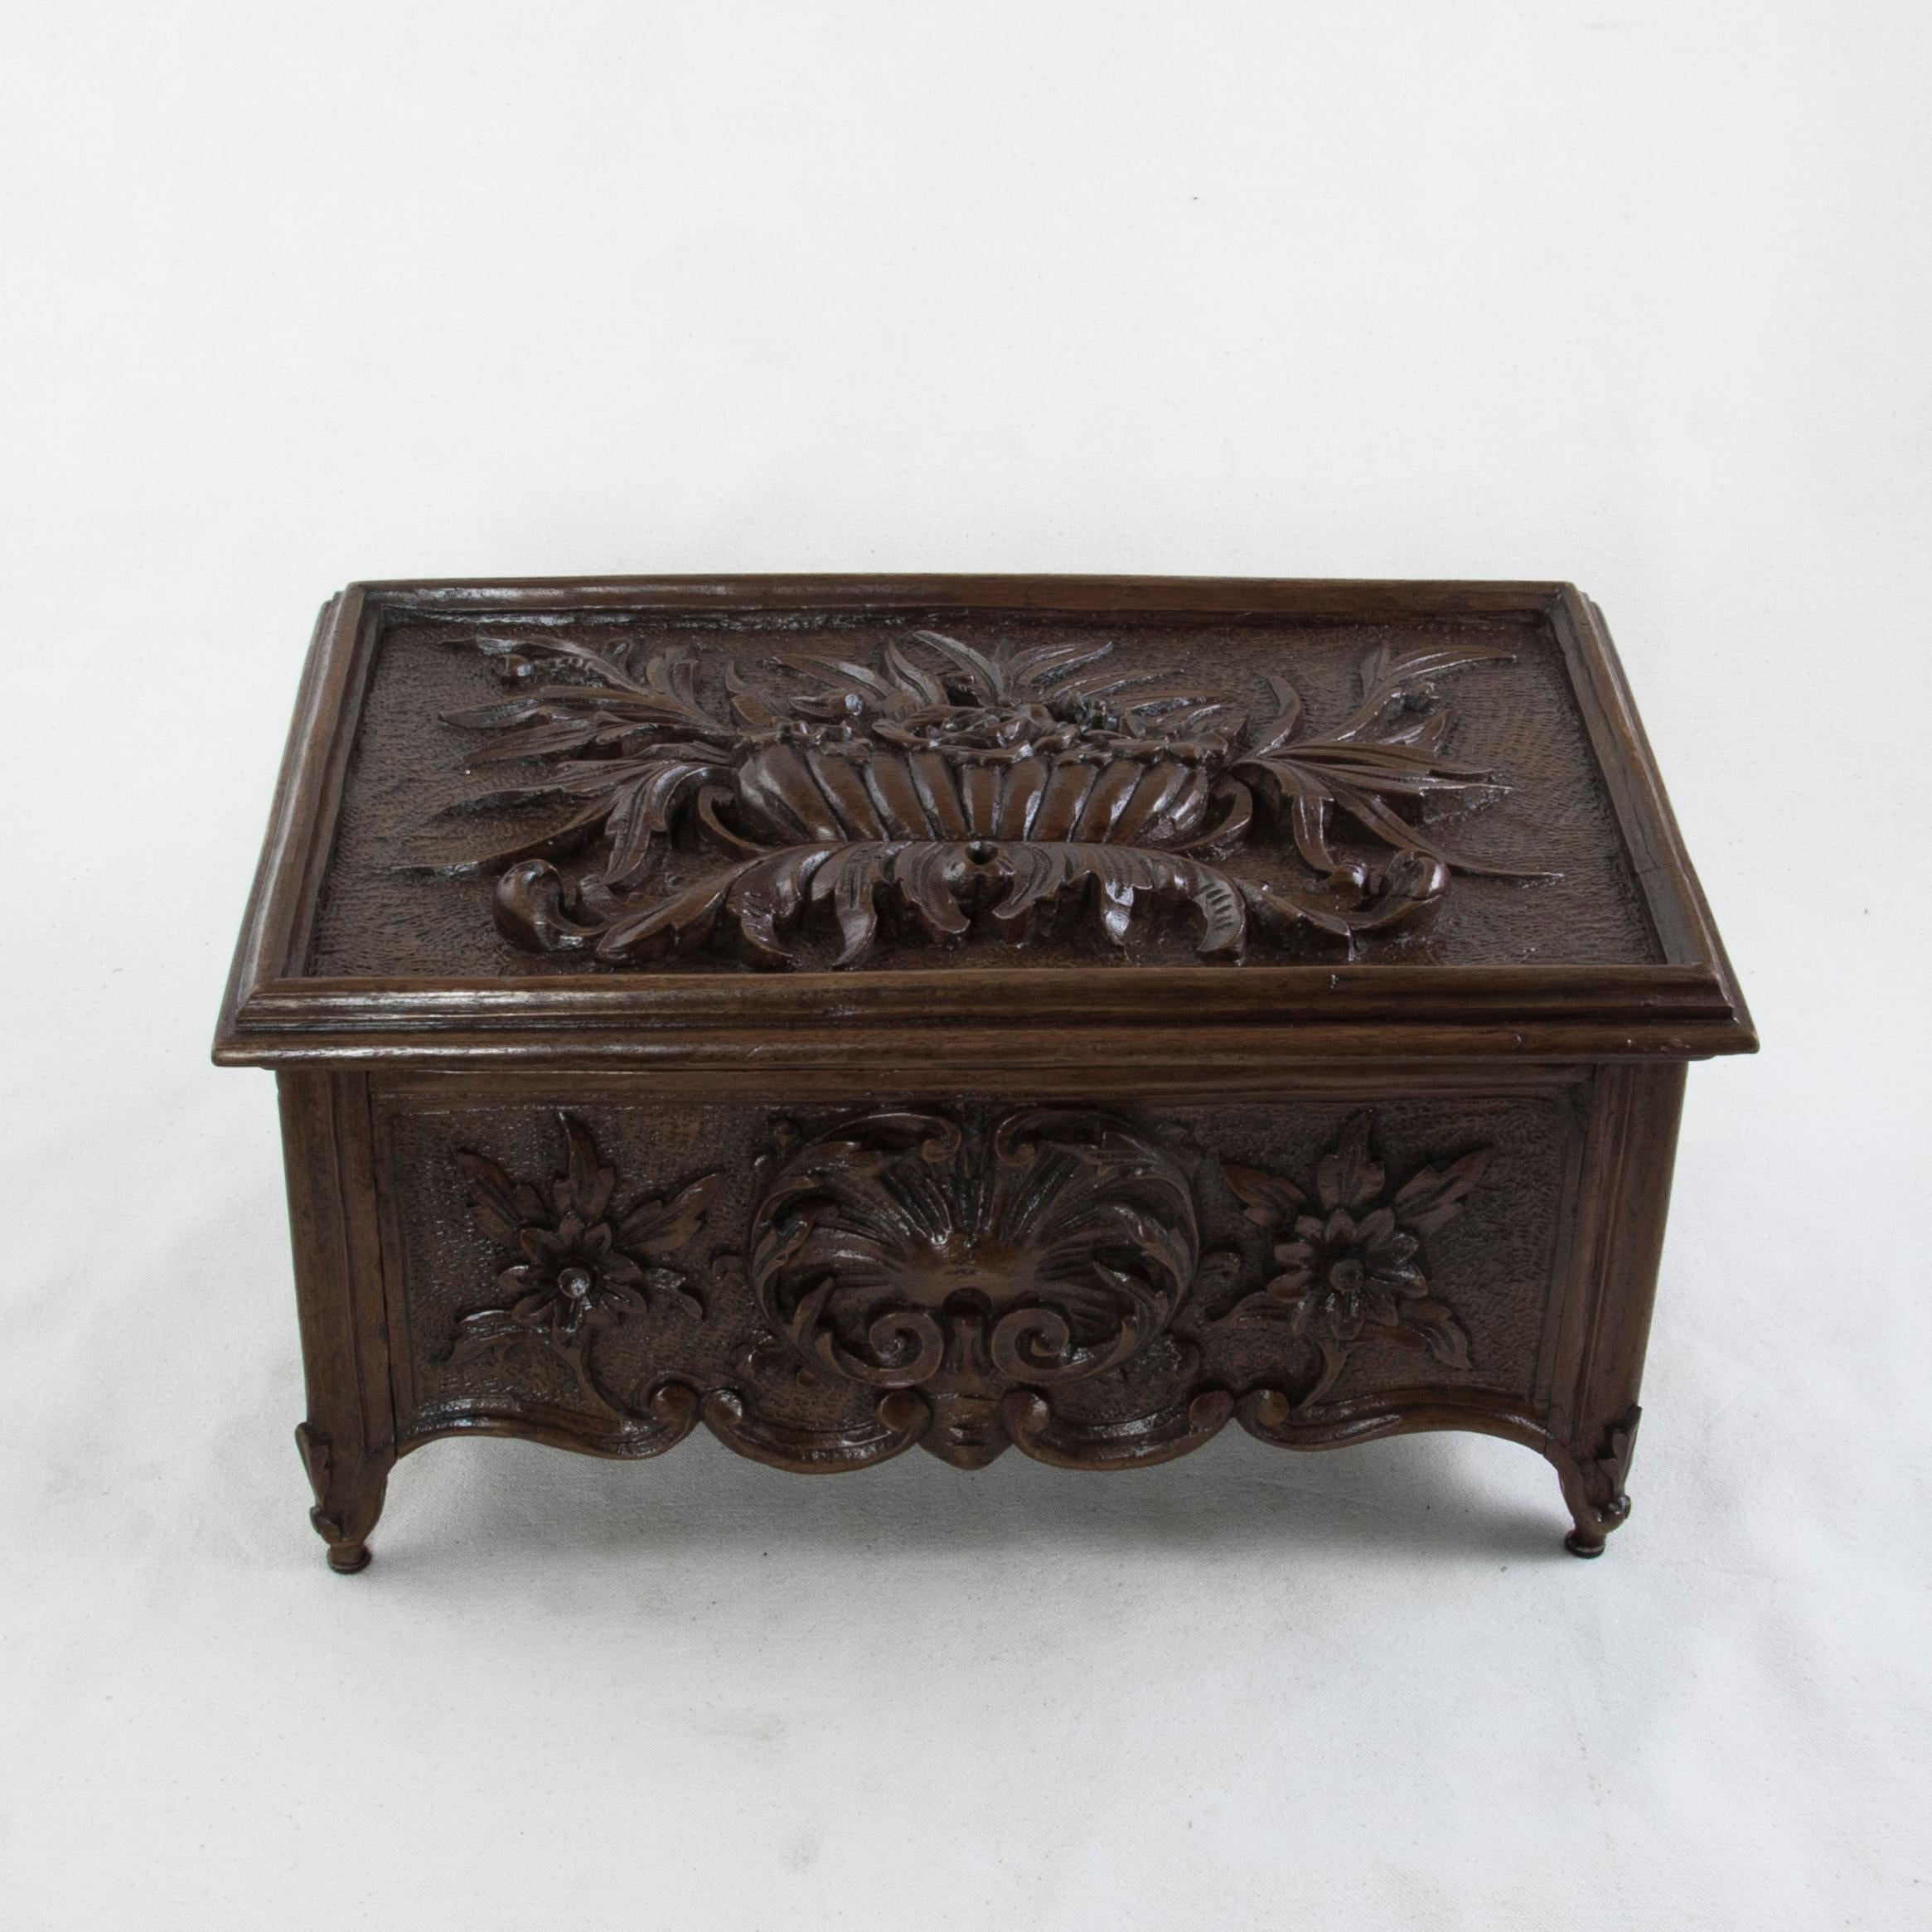 This large late 19th century French Louis XV style walnut box features deep relief hand carved details on all sides. The lid of the box displays a large bouquet of flowers in a basket. The front is detailed with a scrolled shell flanked by flowers